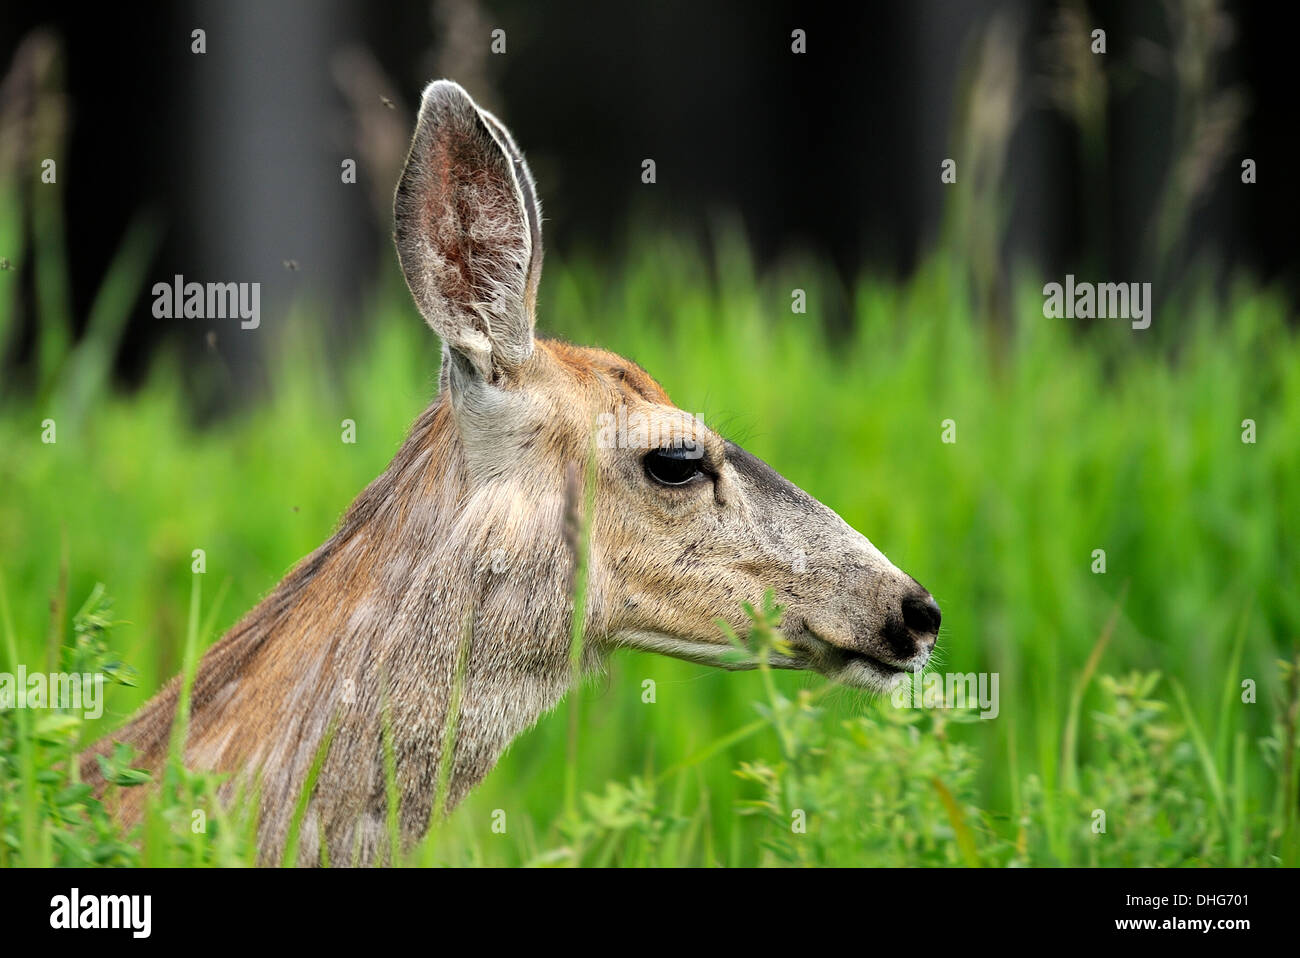 A close up side view of a female mule deer's face Stock Photo